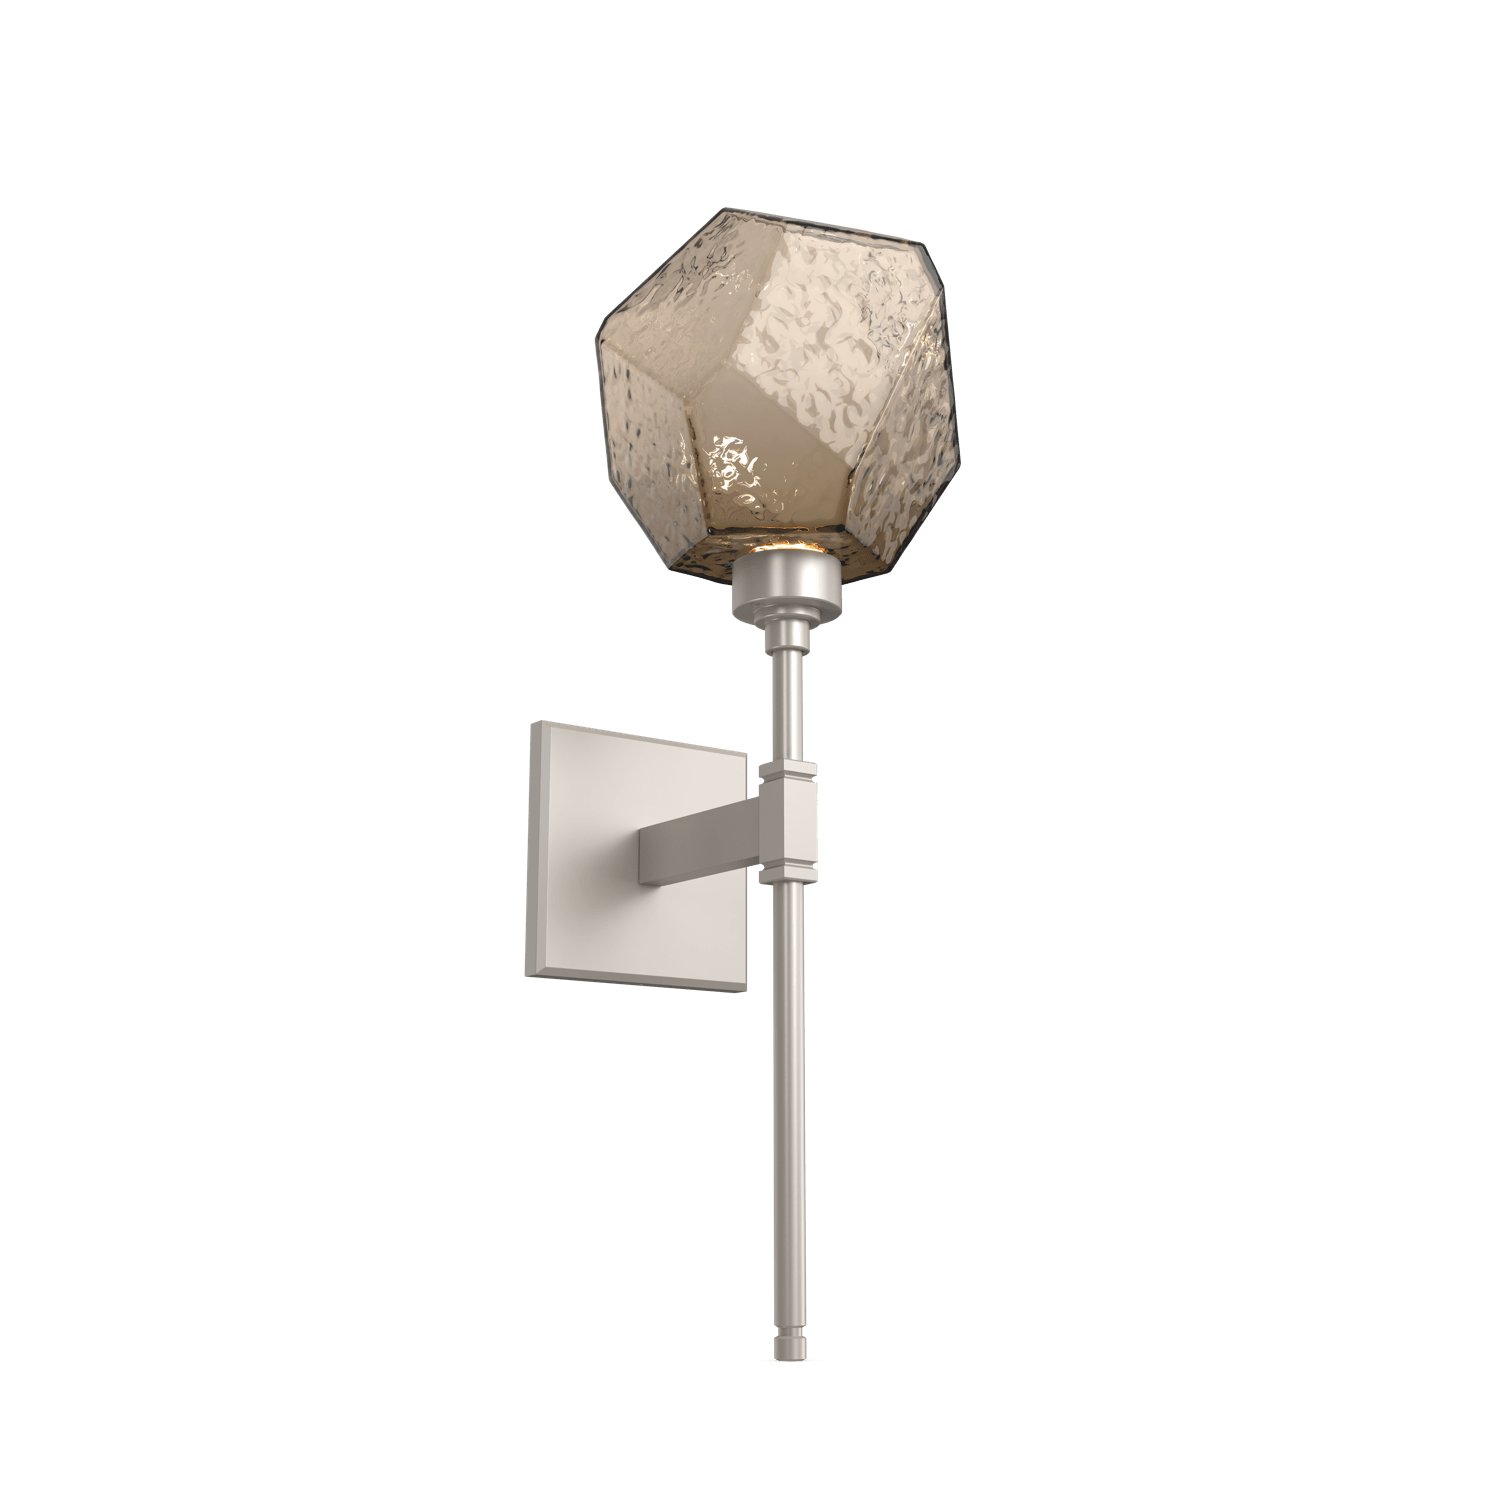 IDB0039-08-BS-B-Hammerton-Studio-Gem-belvedere-wall-sconce-with-metallic-beige-silver-finish-and-bronze-blown-glass-shades-and-LED-lamping